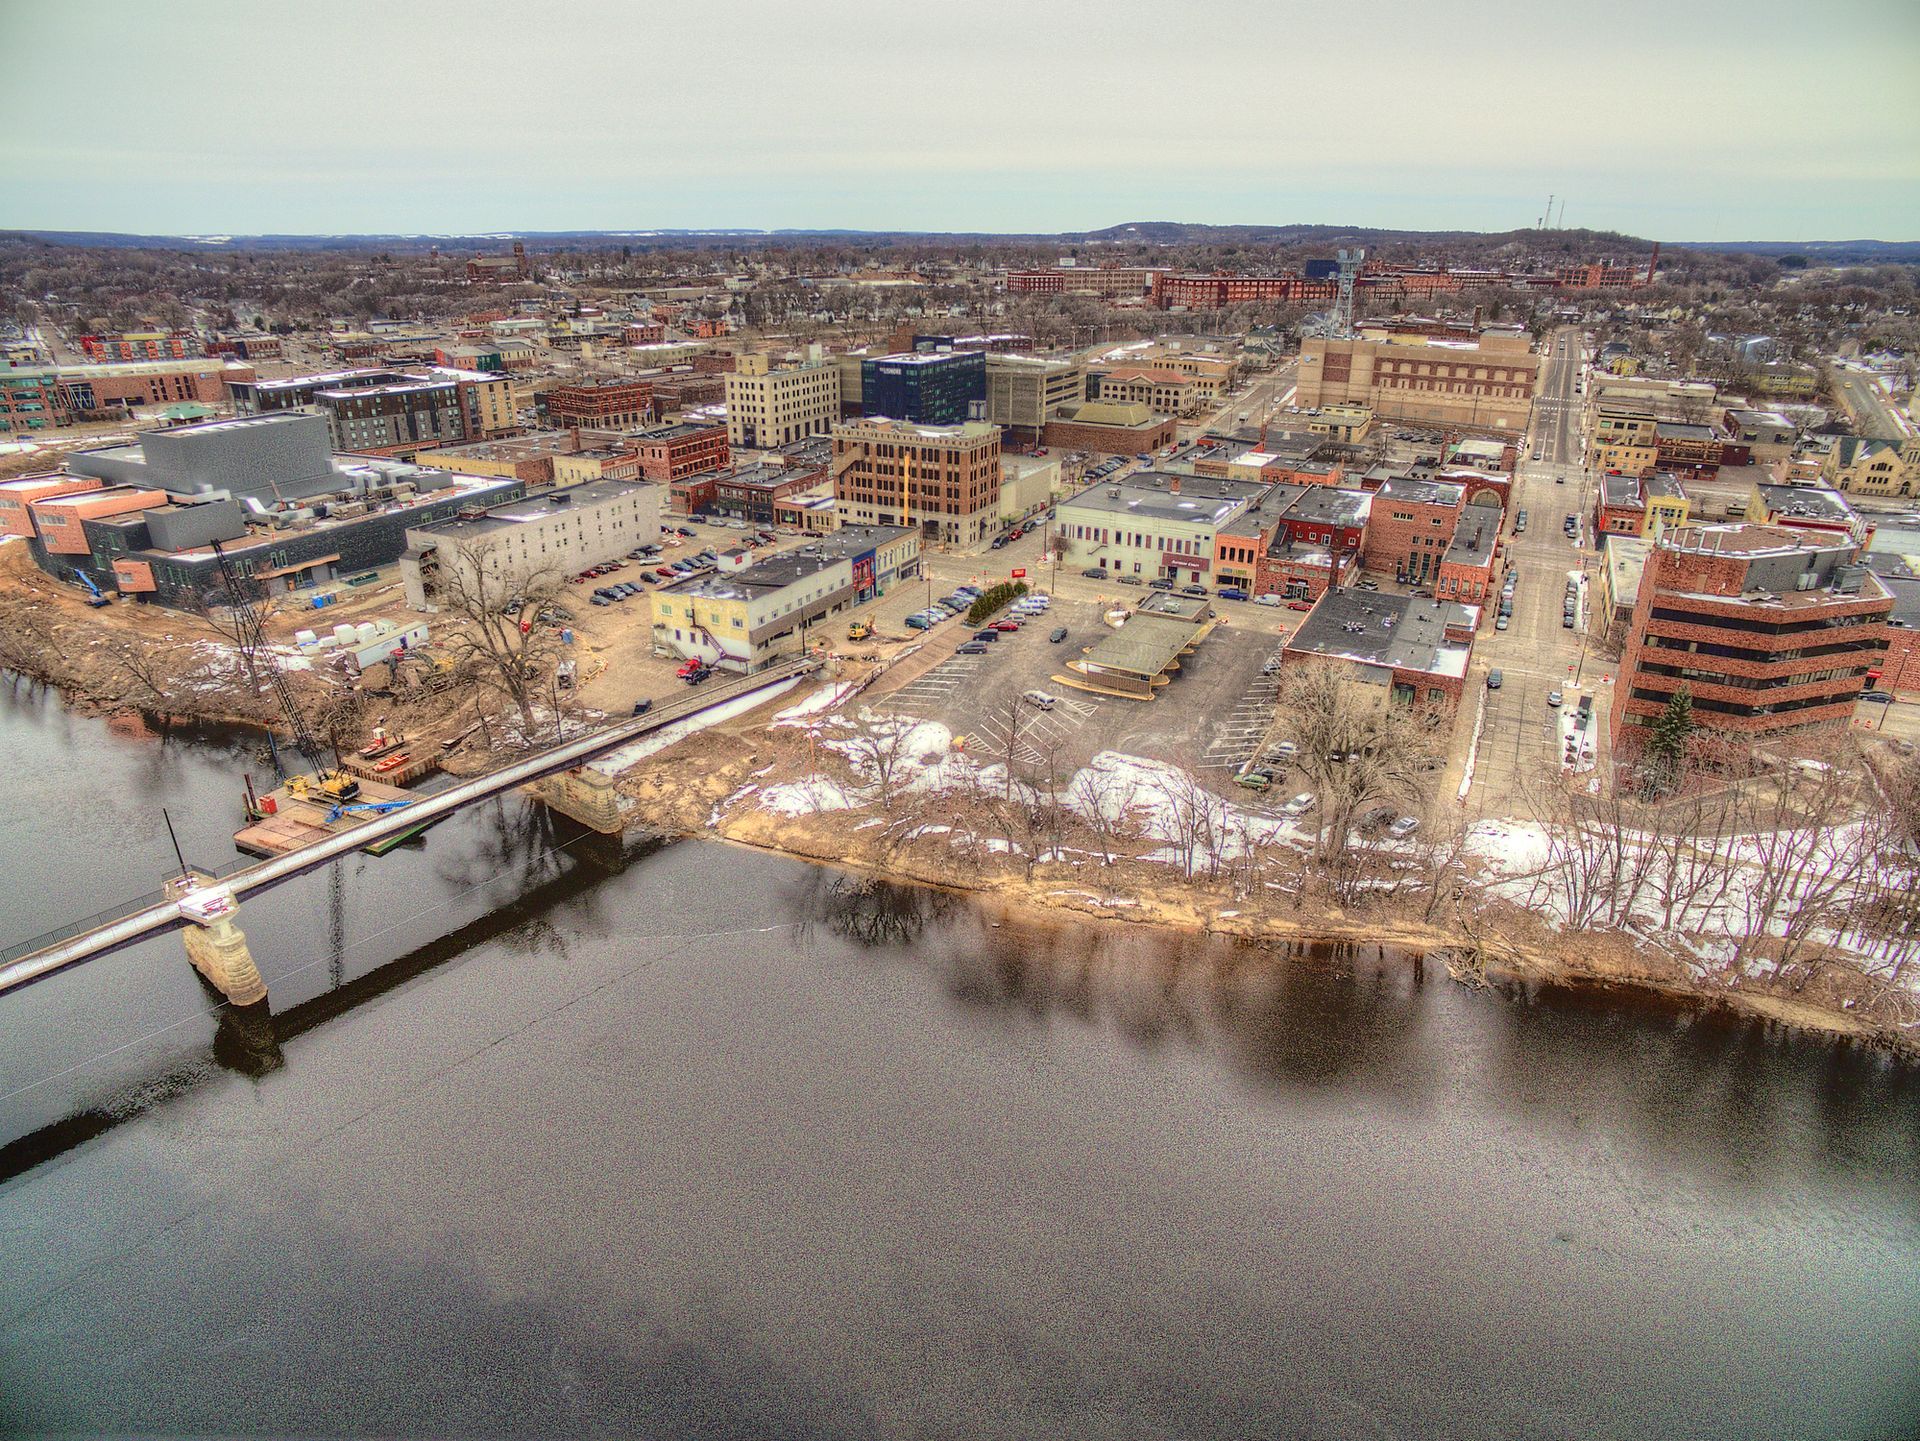 An aerial view of a city with a bridge over a river — Random Lake, WI — Hawley, Kaufman & Kautzer S.C.